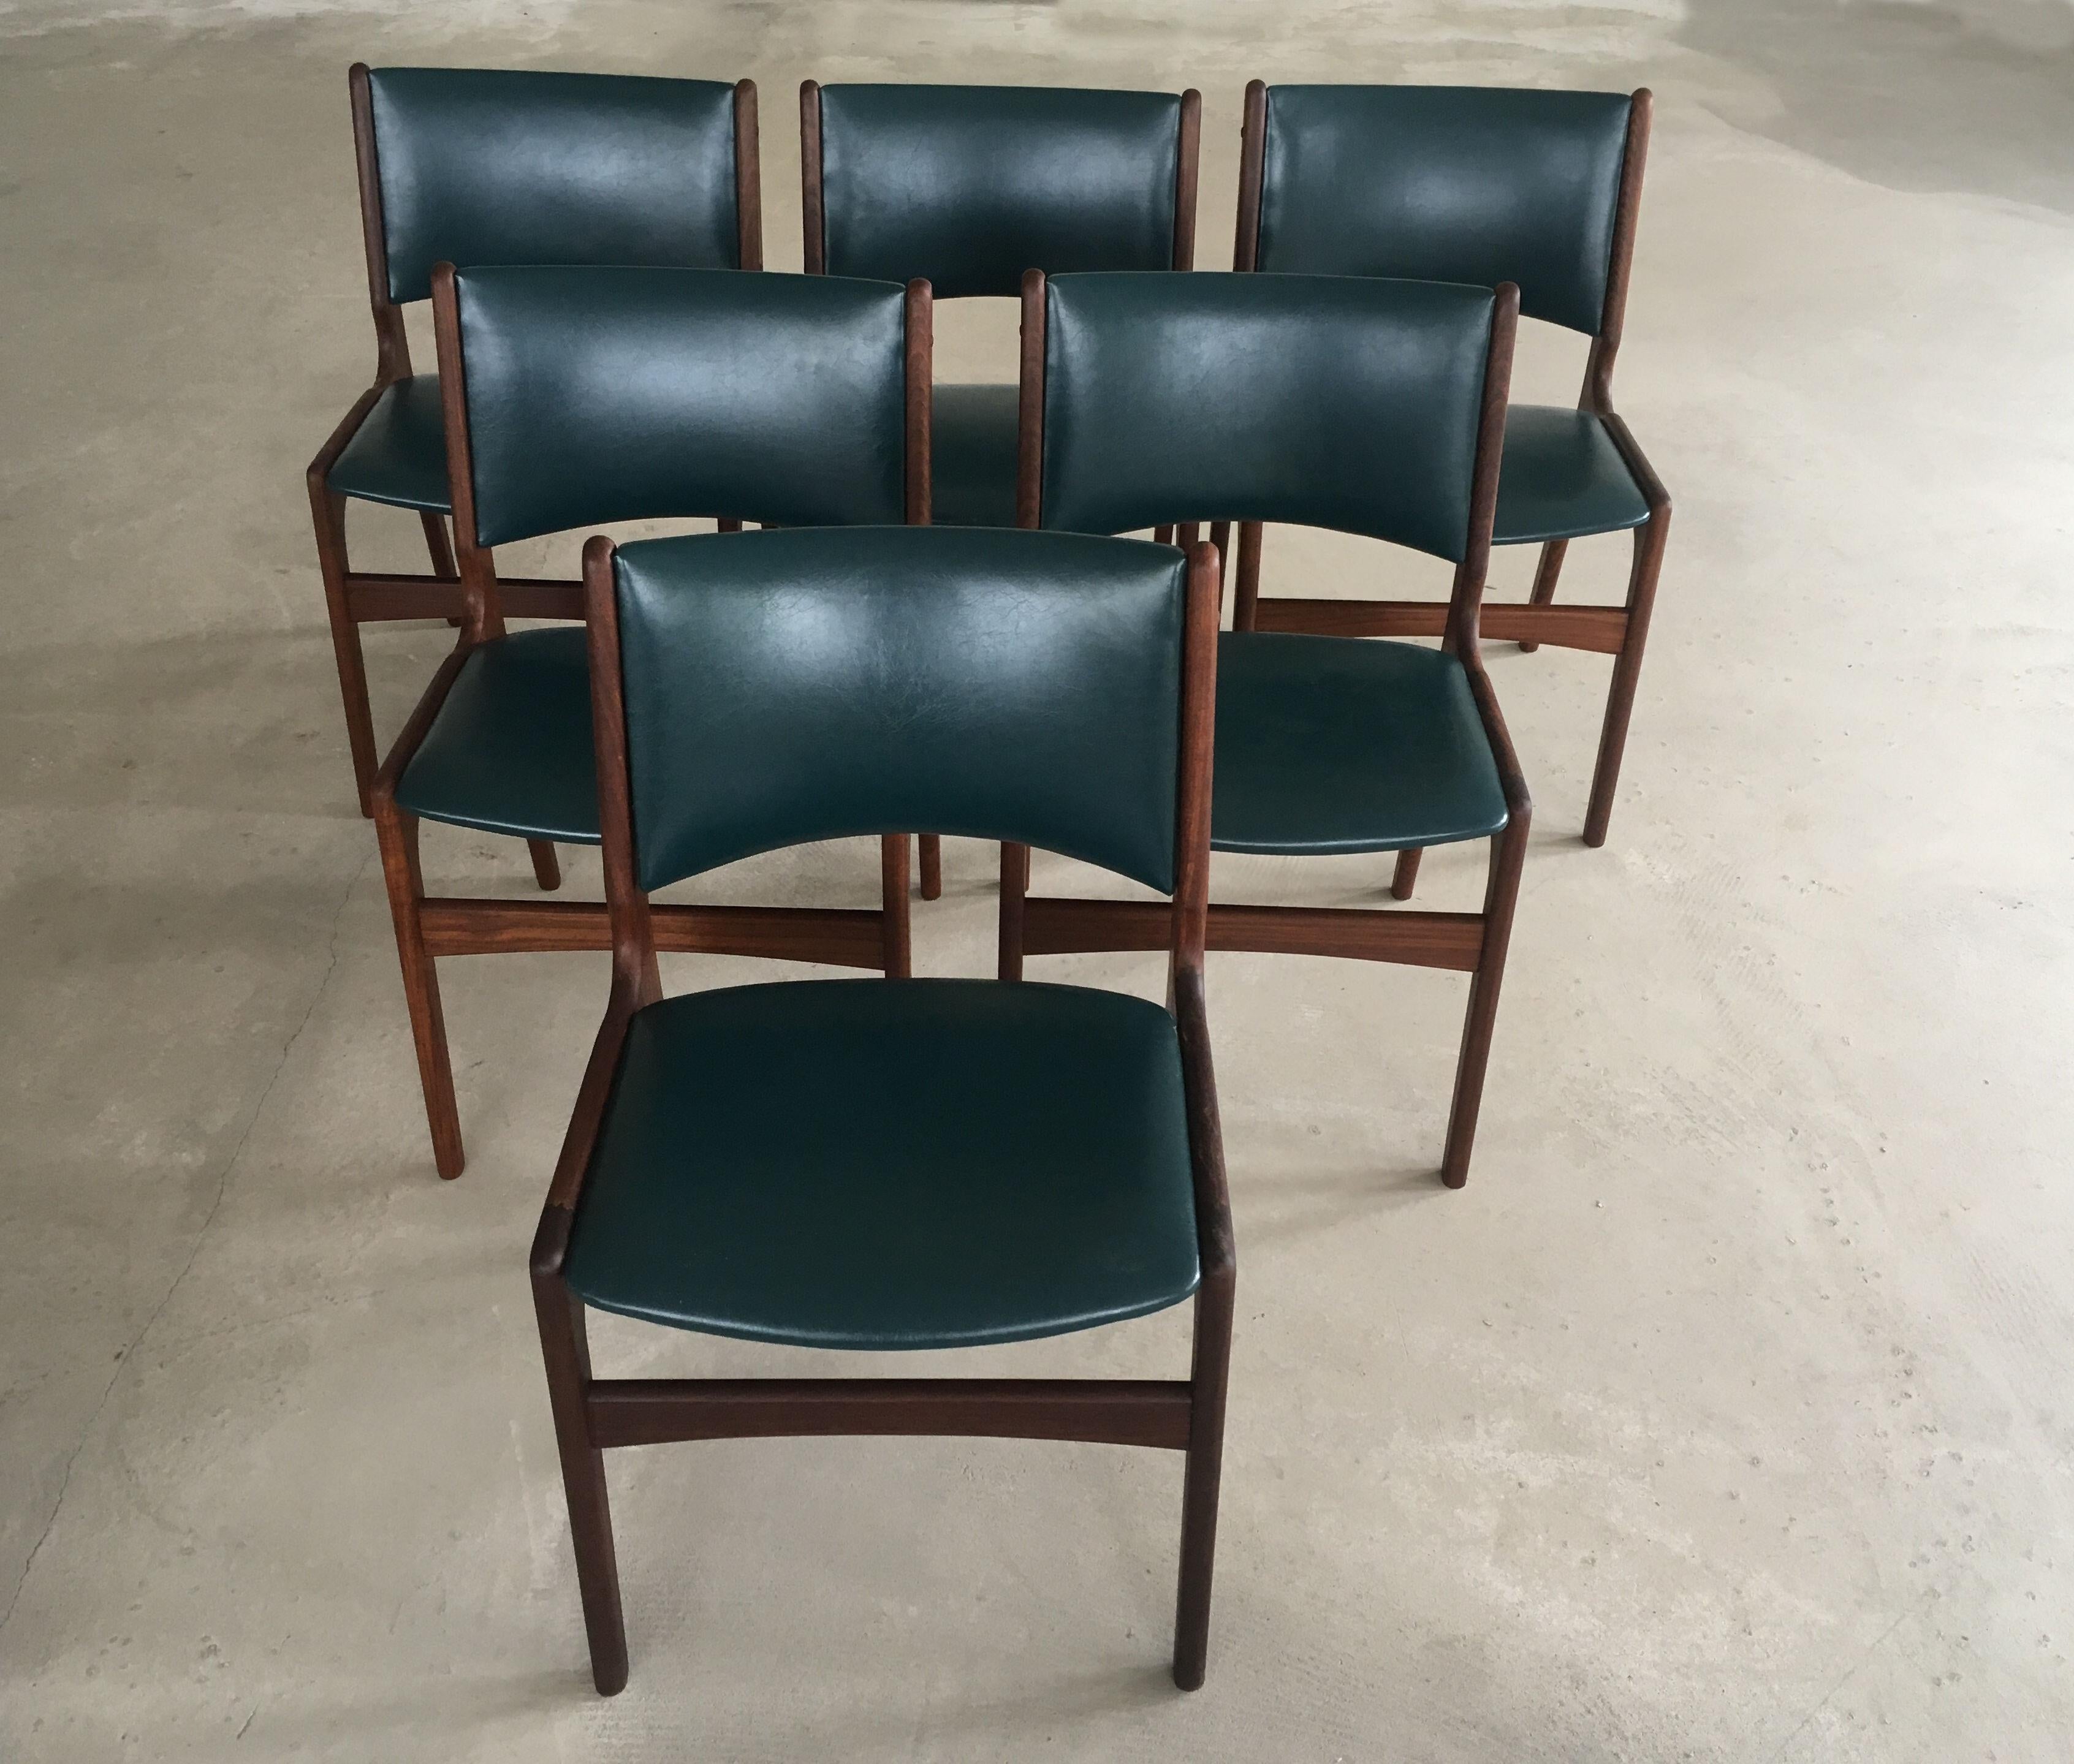 Set of six Erik Buch dining chairs made by Anderstrup Møbelfabrik

The chairs feature a solid teak frame and are as all of Erik Buchs chairs characterized by top quality materials, solid craftsmanship, Scandinavian aesthetic and not least a